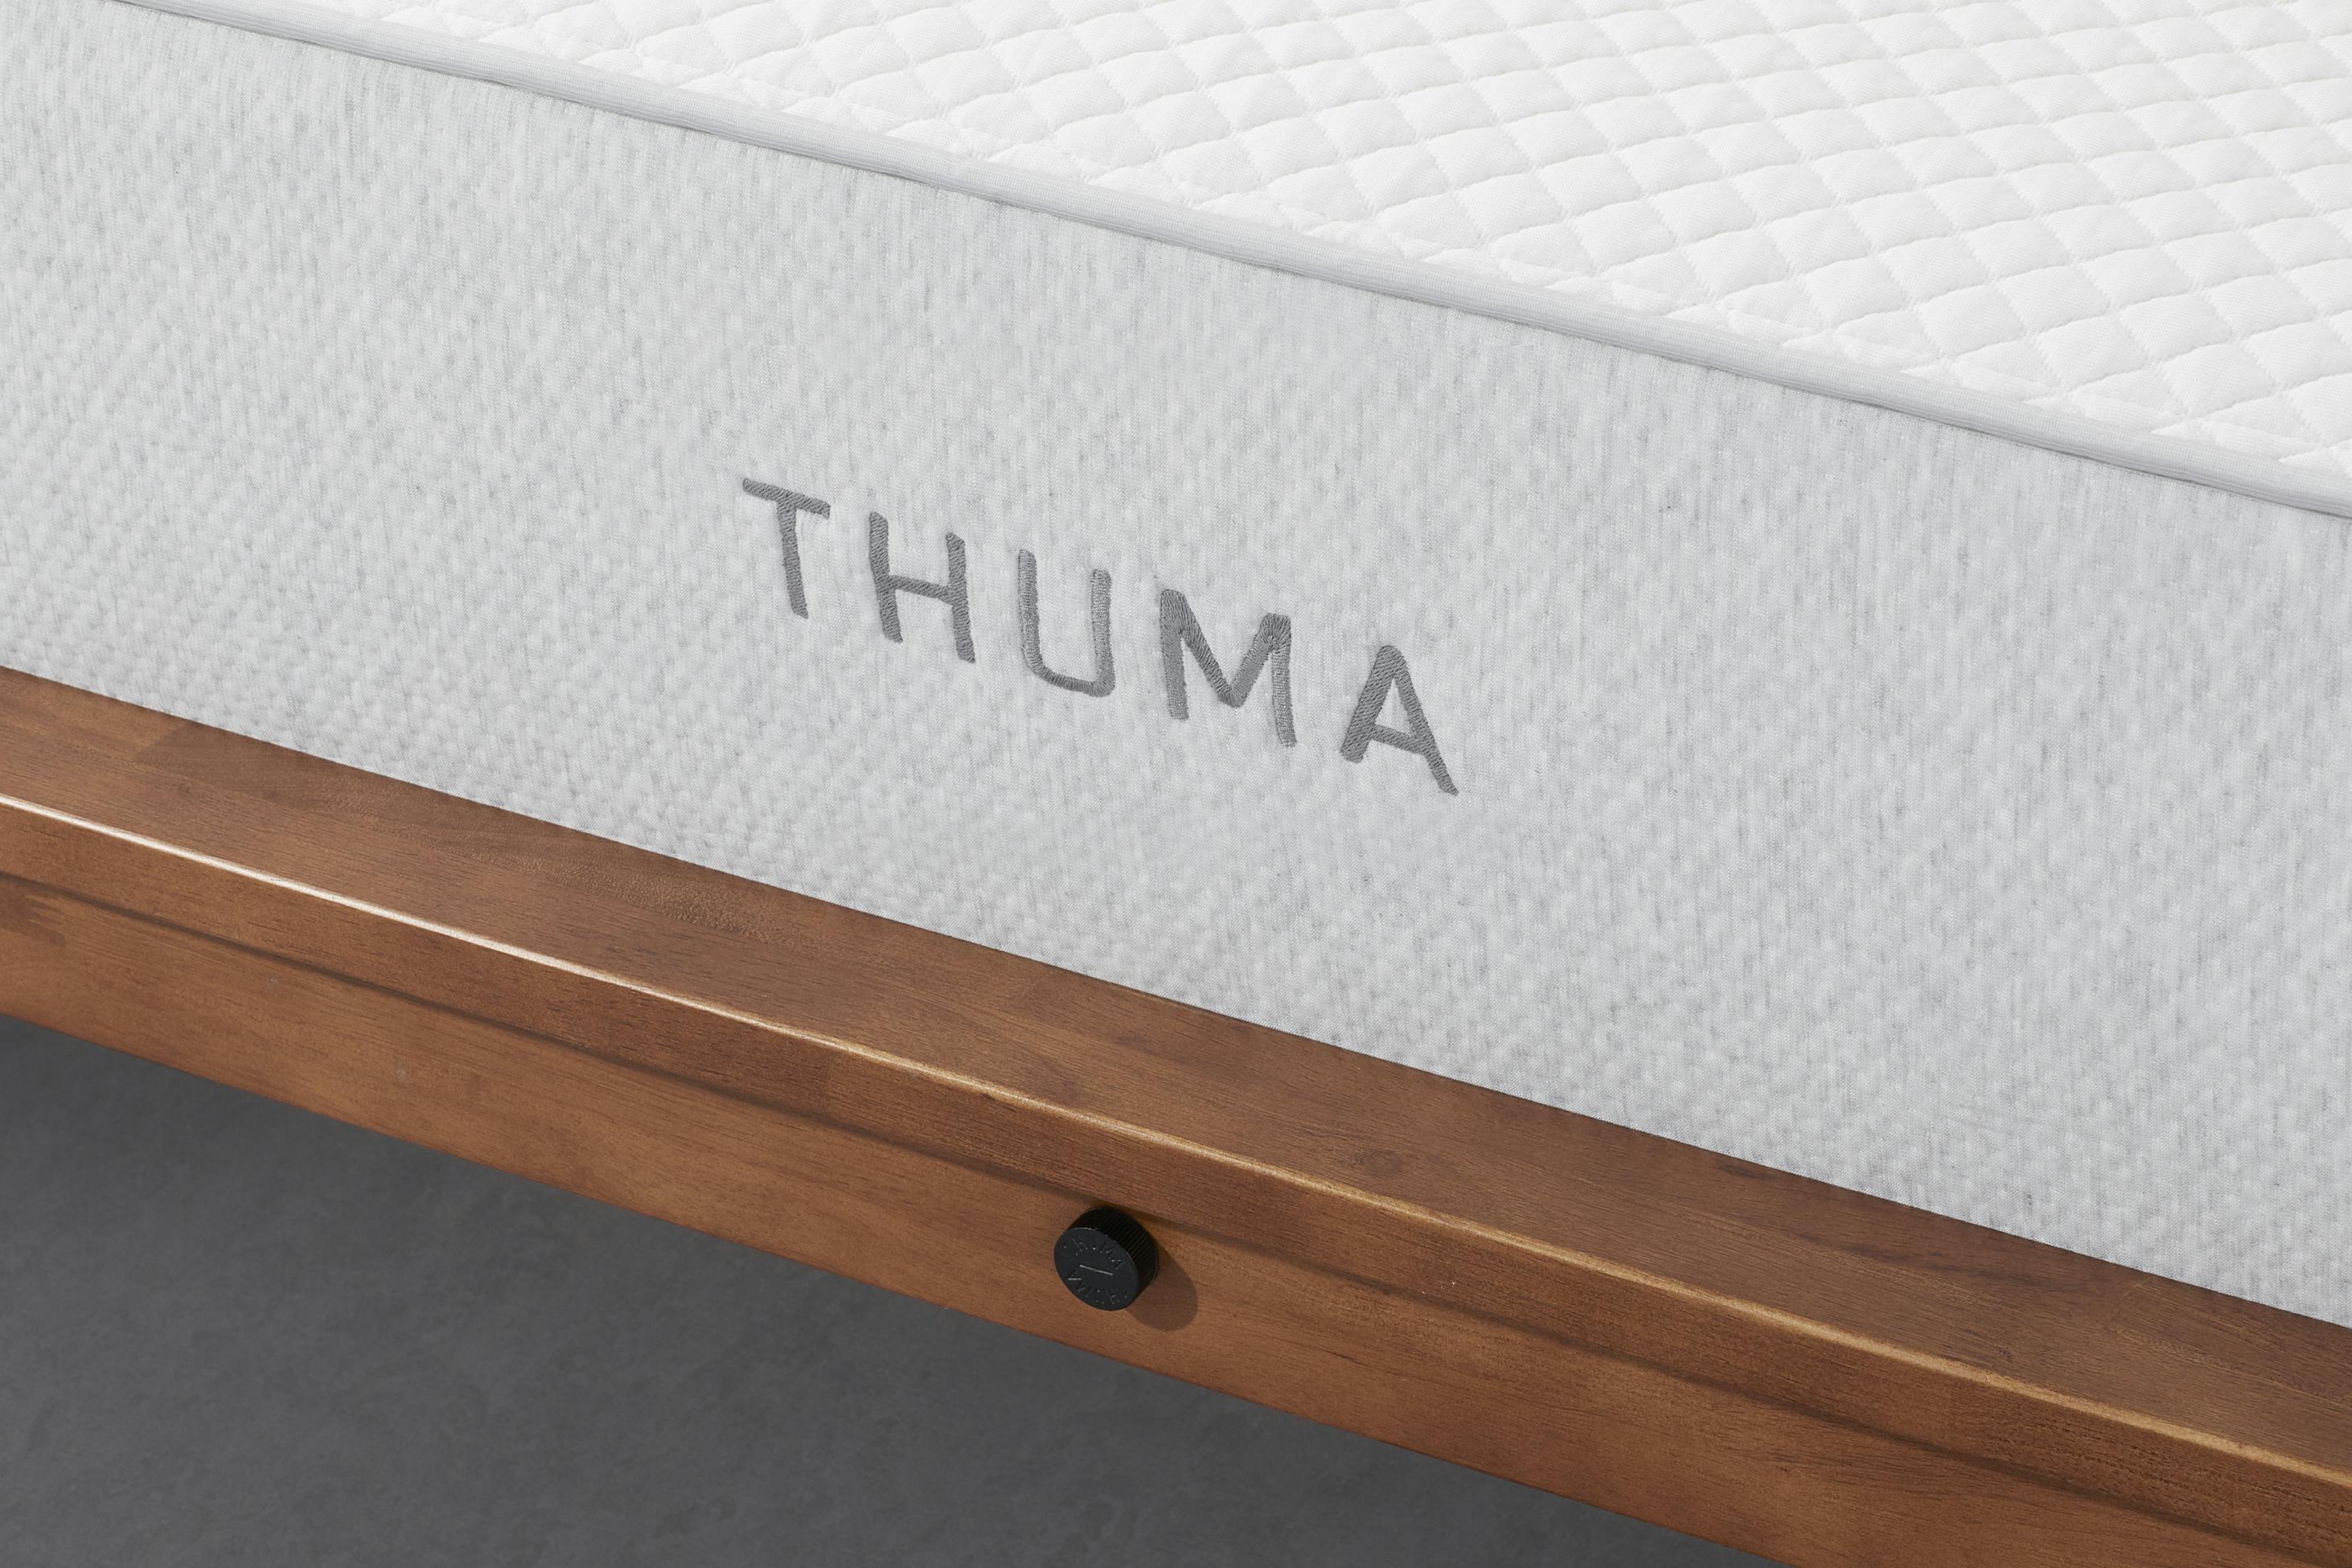 The Mattress Displayed on a Wooden Bed Frame